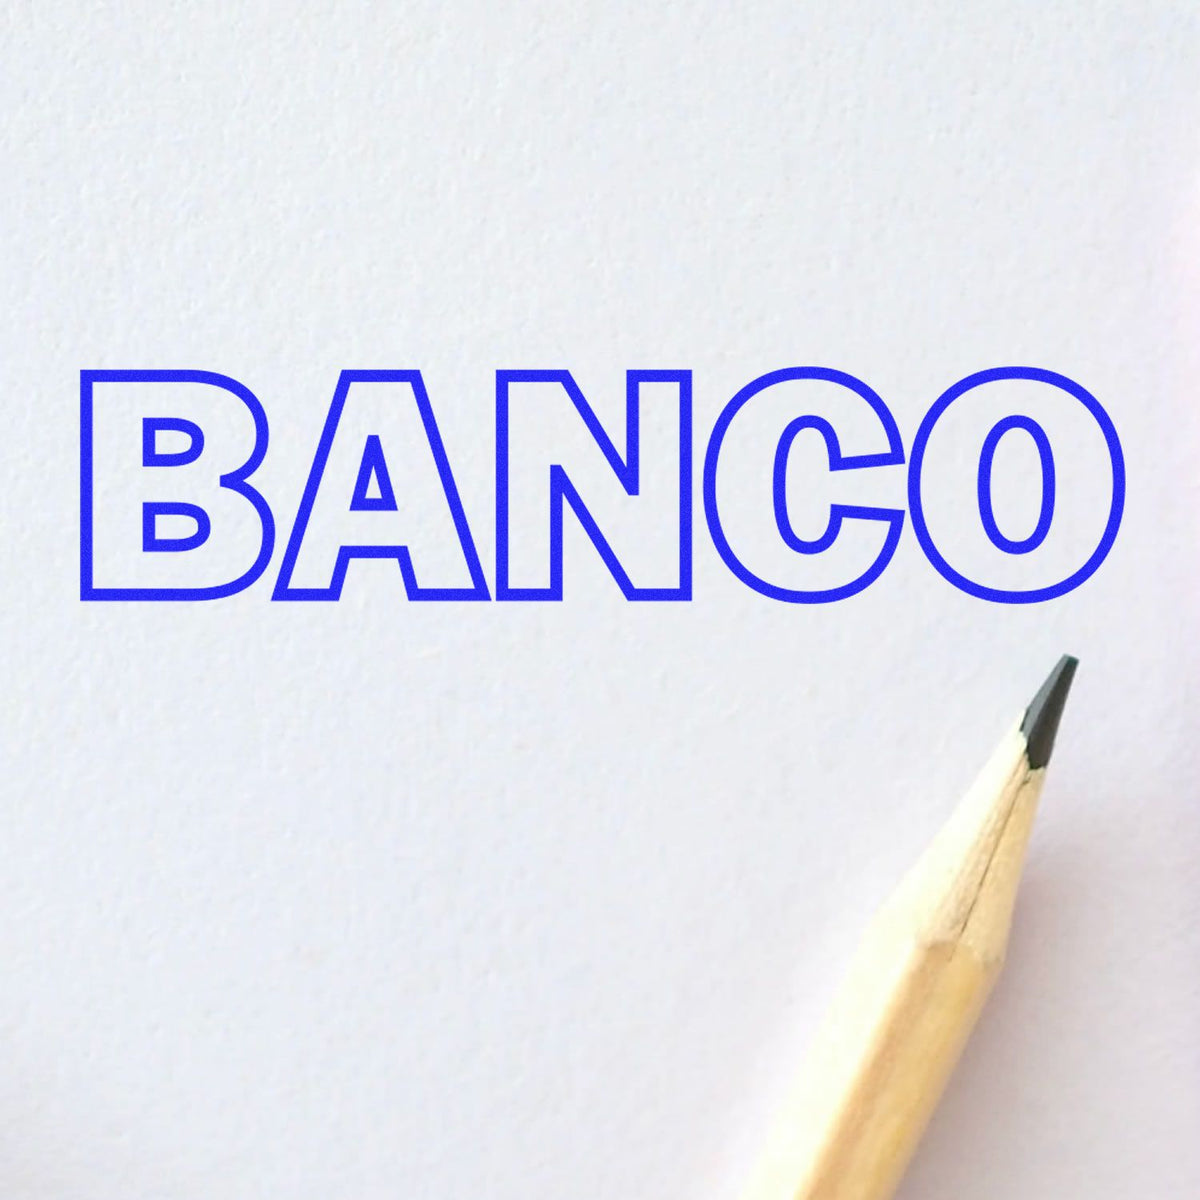 Large Banco Rubber Stamp In Use Photo